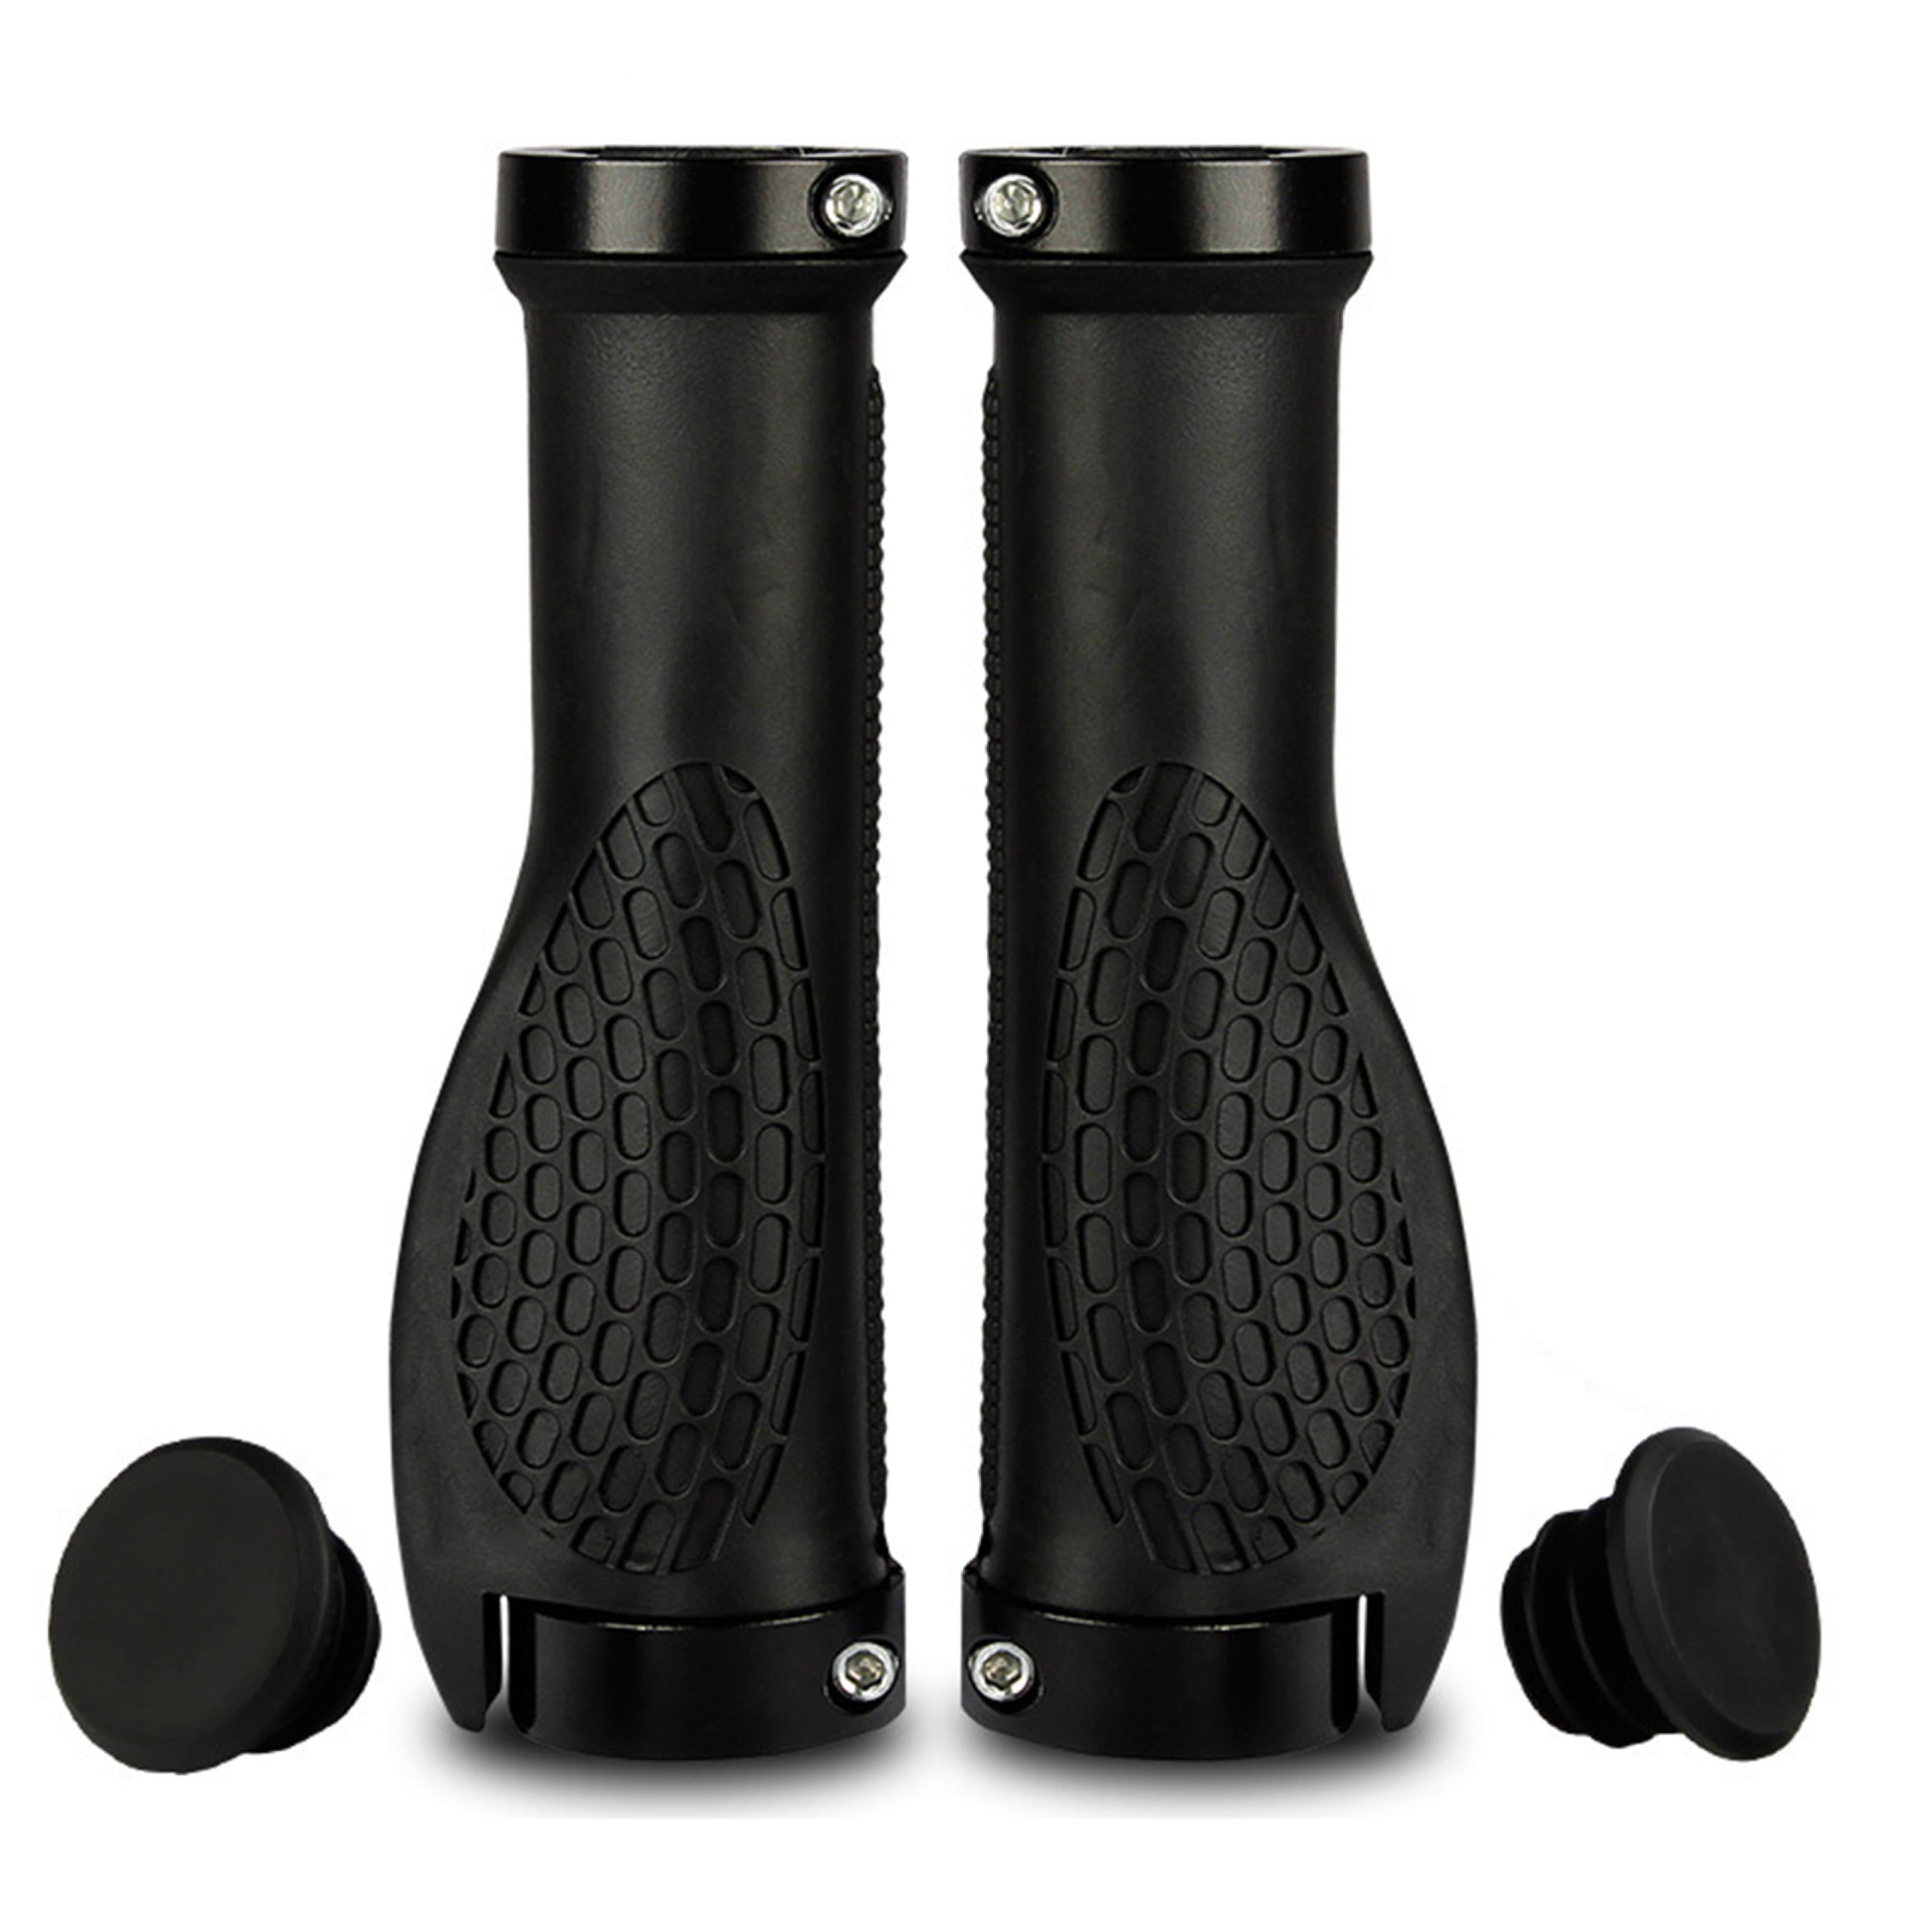 New Black Rubber MTB Grips Keirin For 22.2mm Handle Bars Free P&P 